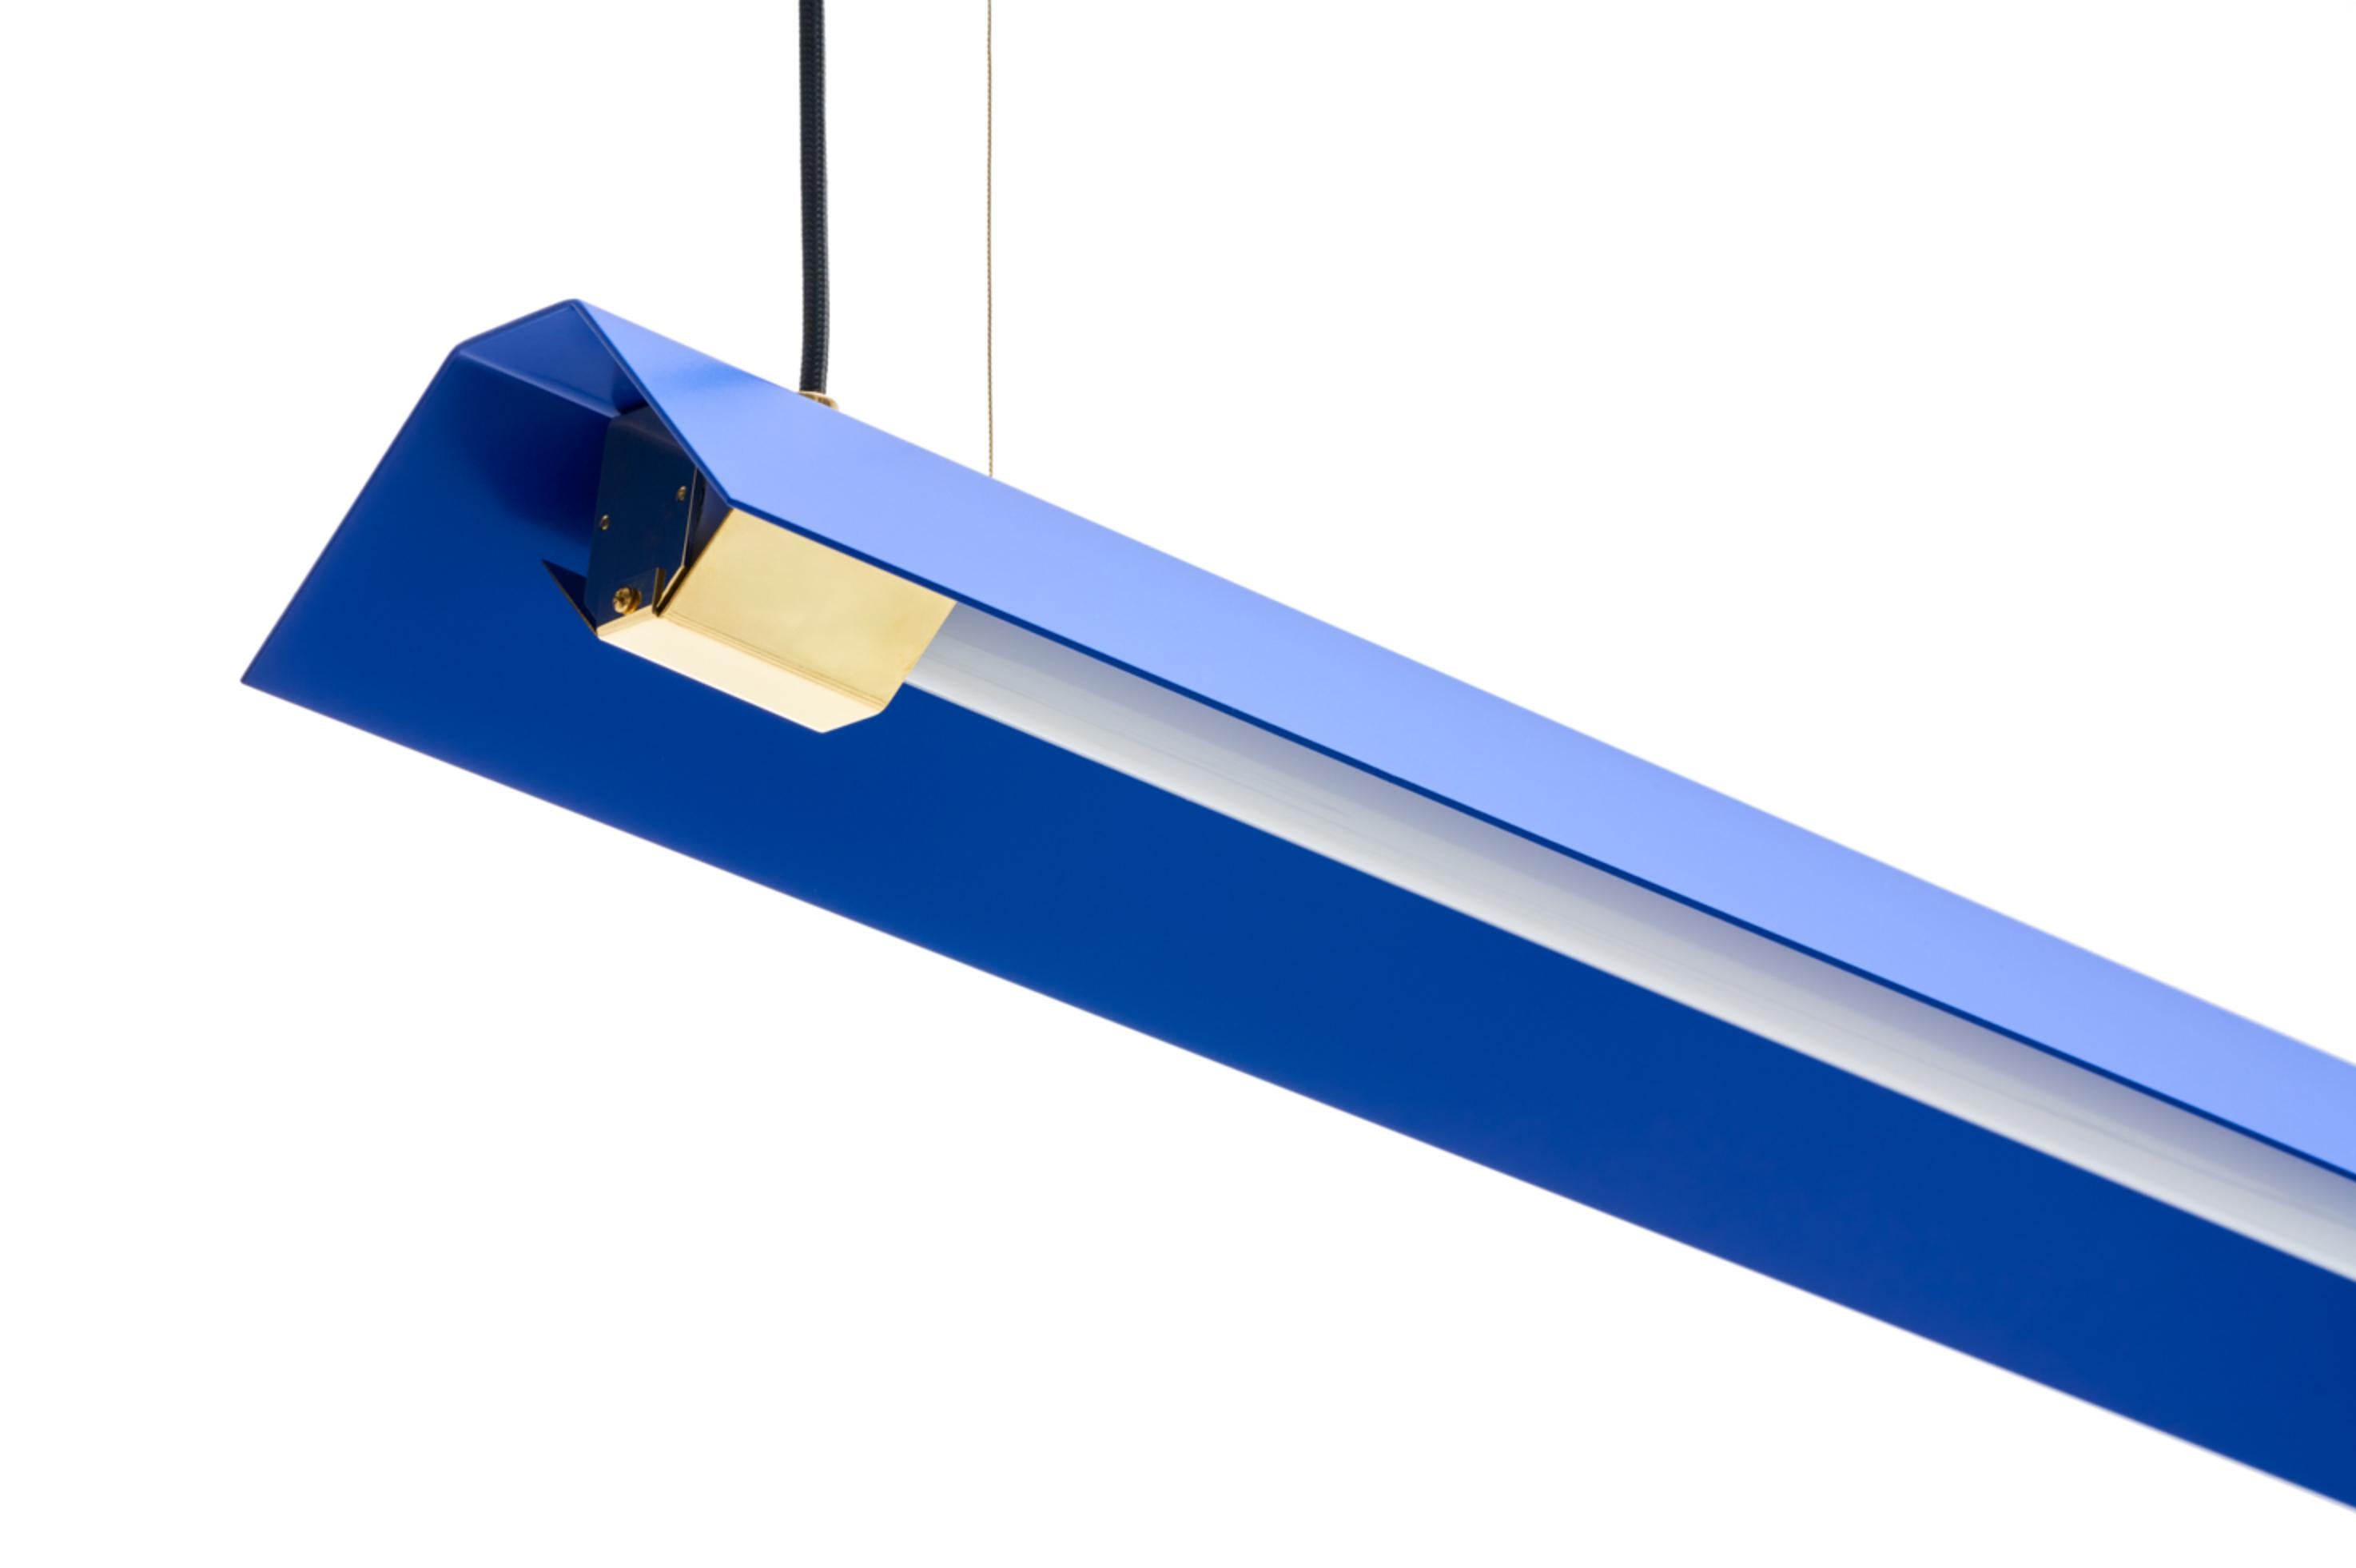 Extra Large Misalliance ex ultramarine suspended light by Lexavala
Dimensions: D 16 x W 160 x H 8 cm
Materials: powder coated shade with details made of brass or stainless steel.

There are two lenghts of socket covers, extending over the LED.